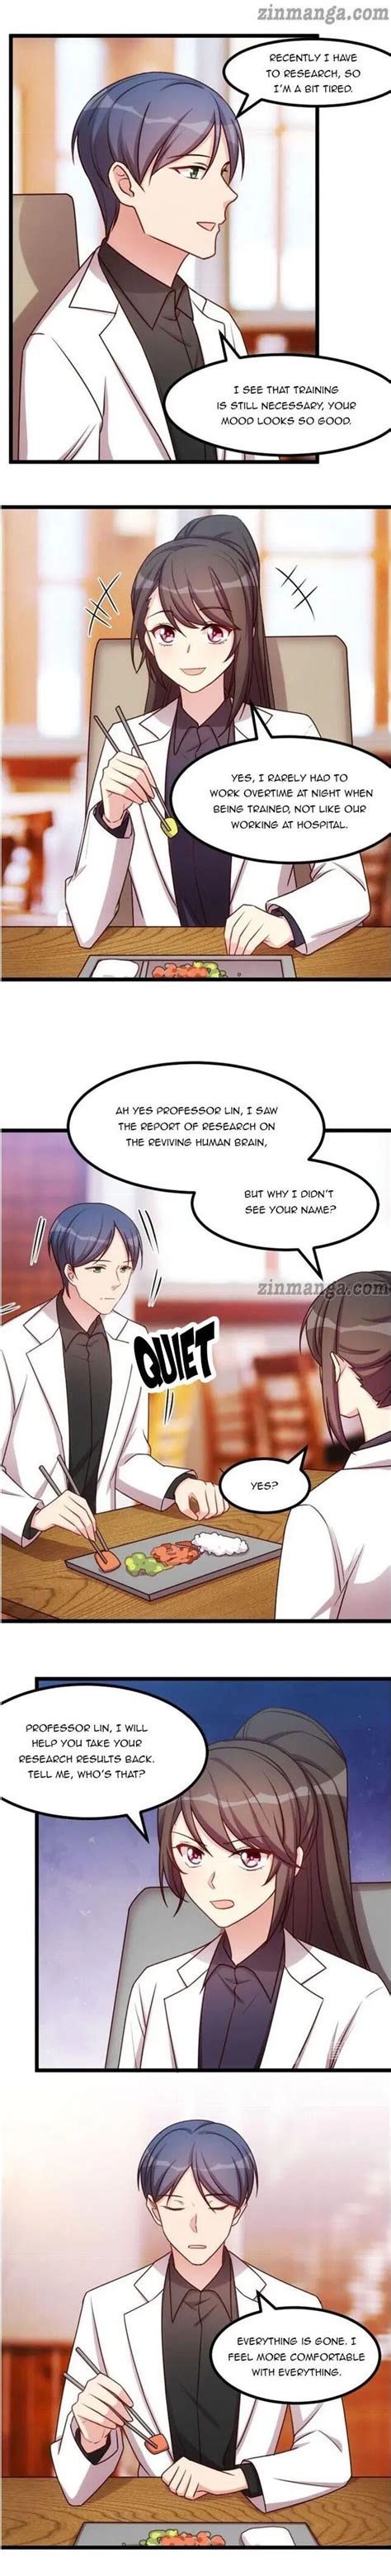 Leave a reply cancel reply. CEO's Sudden Proposal - Chapter 232 - Manga Rock Team ...